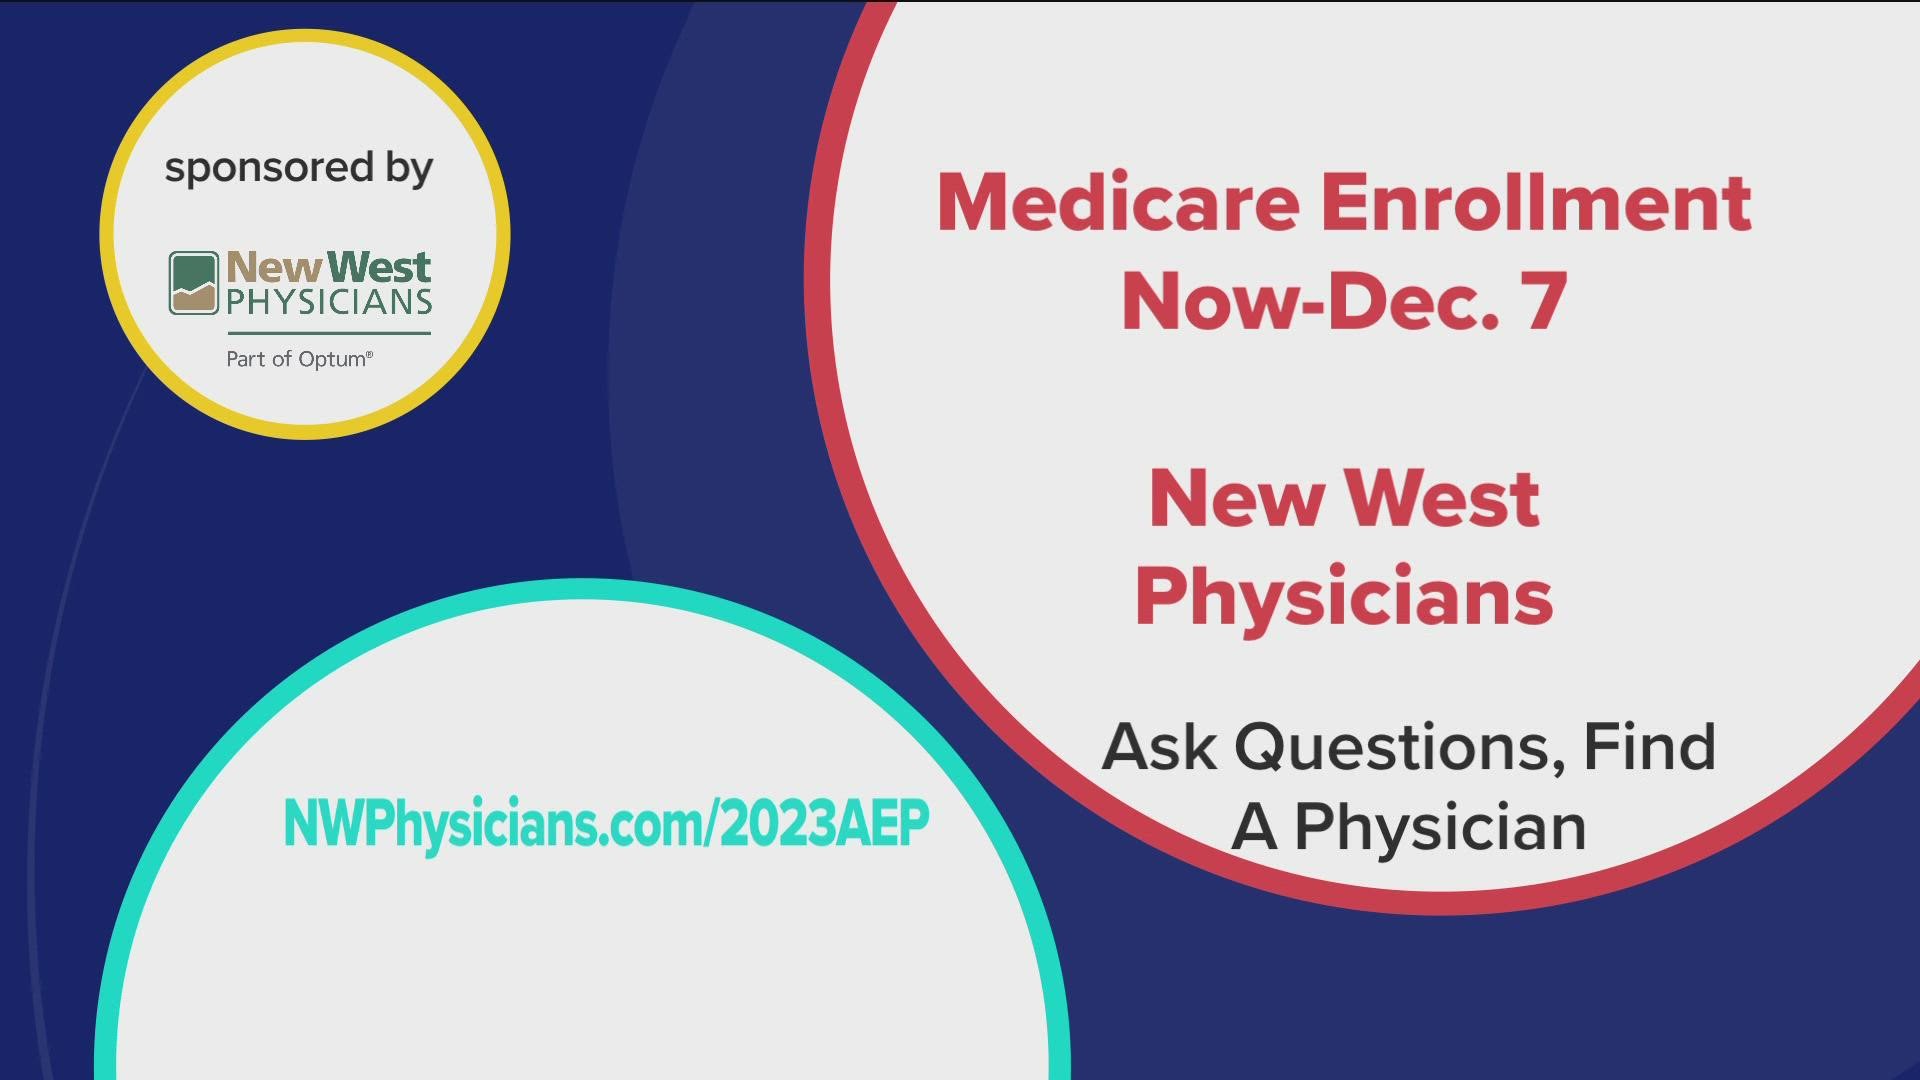 Find a physician and ask questions at NWPhysicians.com/2023AEP. New West Physicians, part of Optum. **PAID CONTENT**